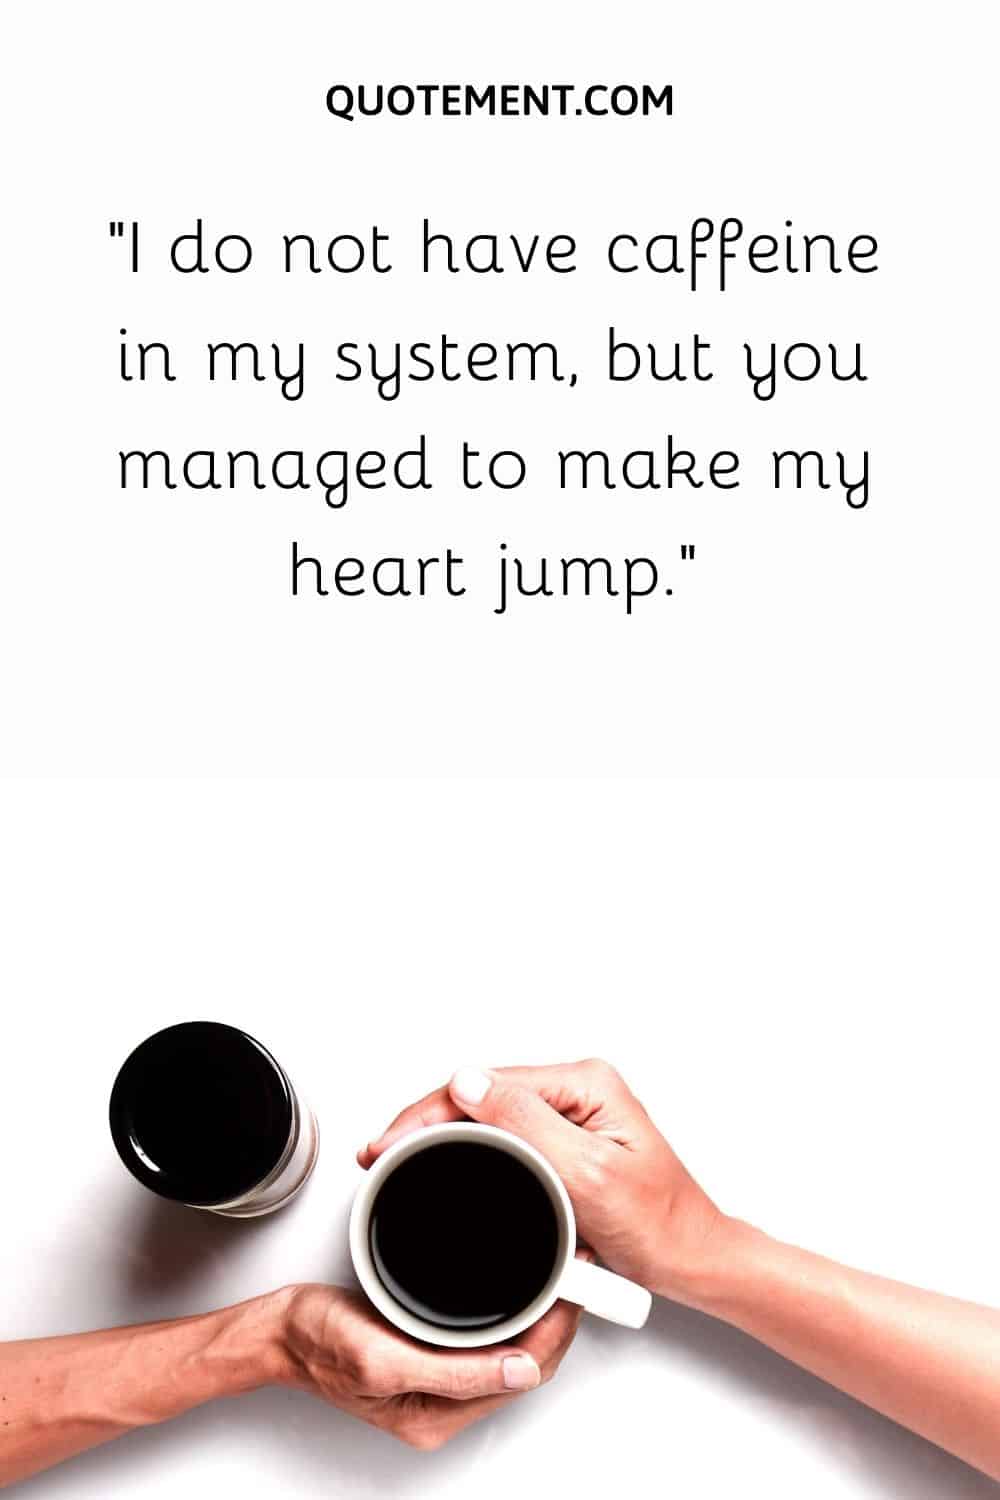 I do not have caffeine in my system, but you managed to make my heart jump